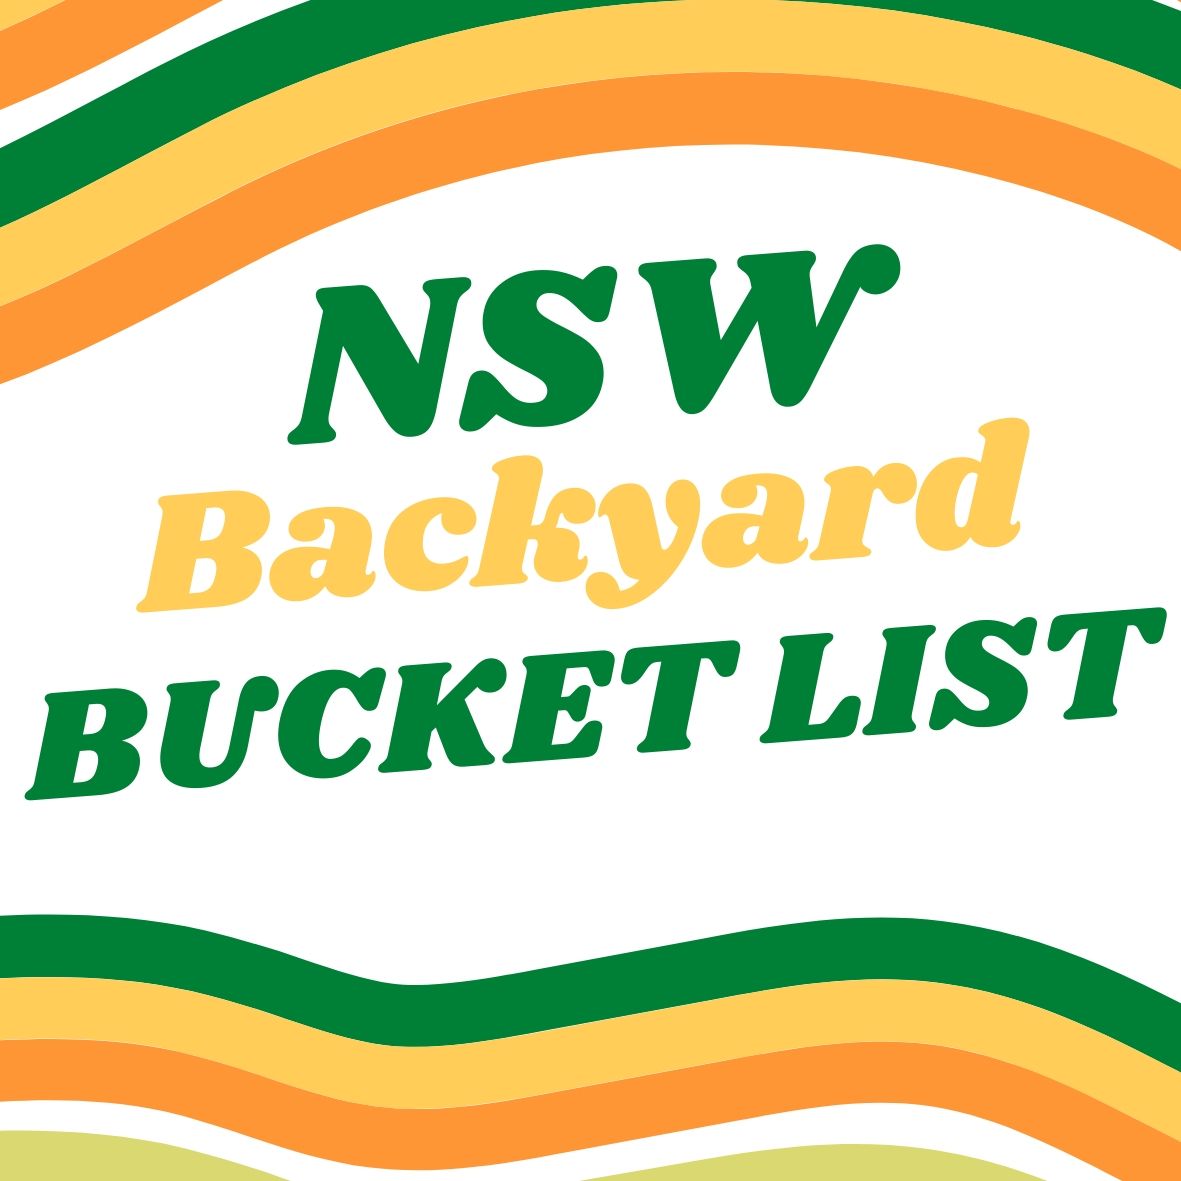 Share your NSW travel faves to build the Ultimate NSW Backyard Bucket List for 2020